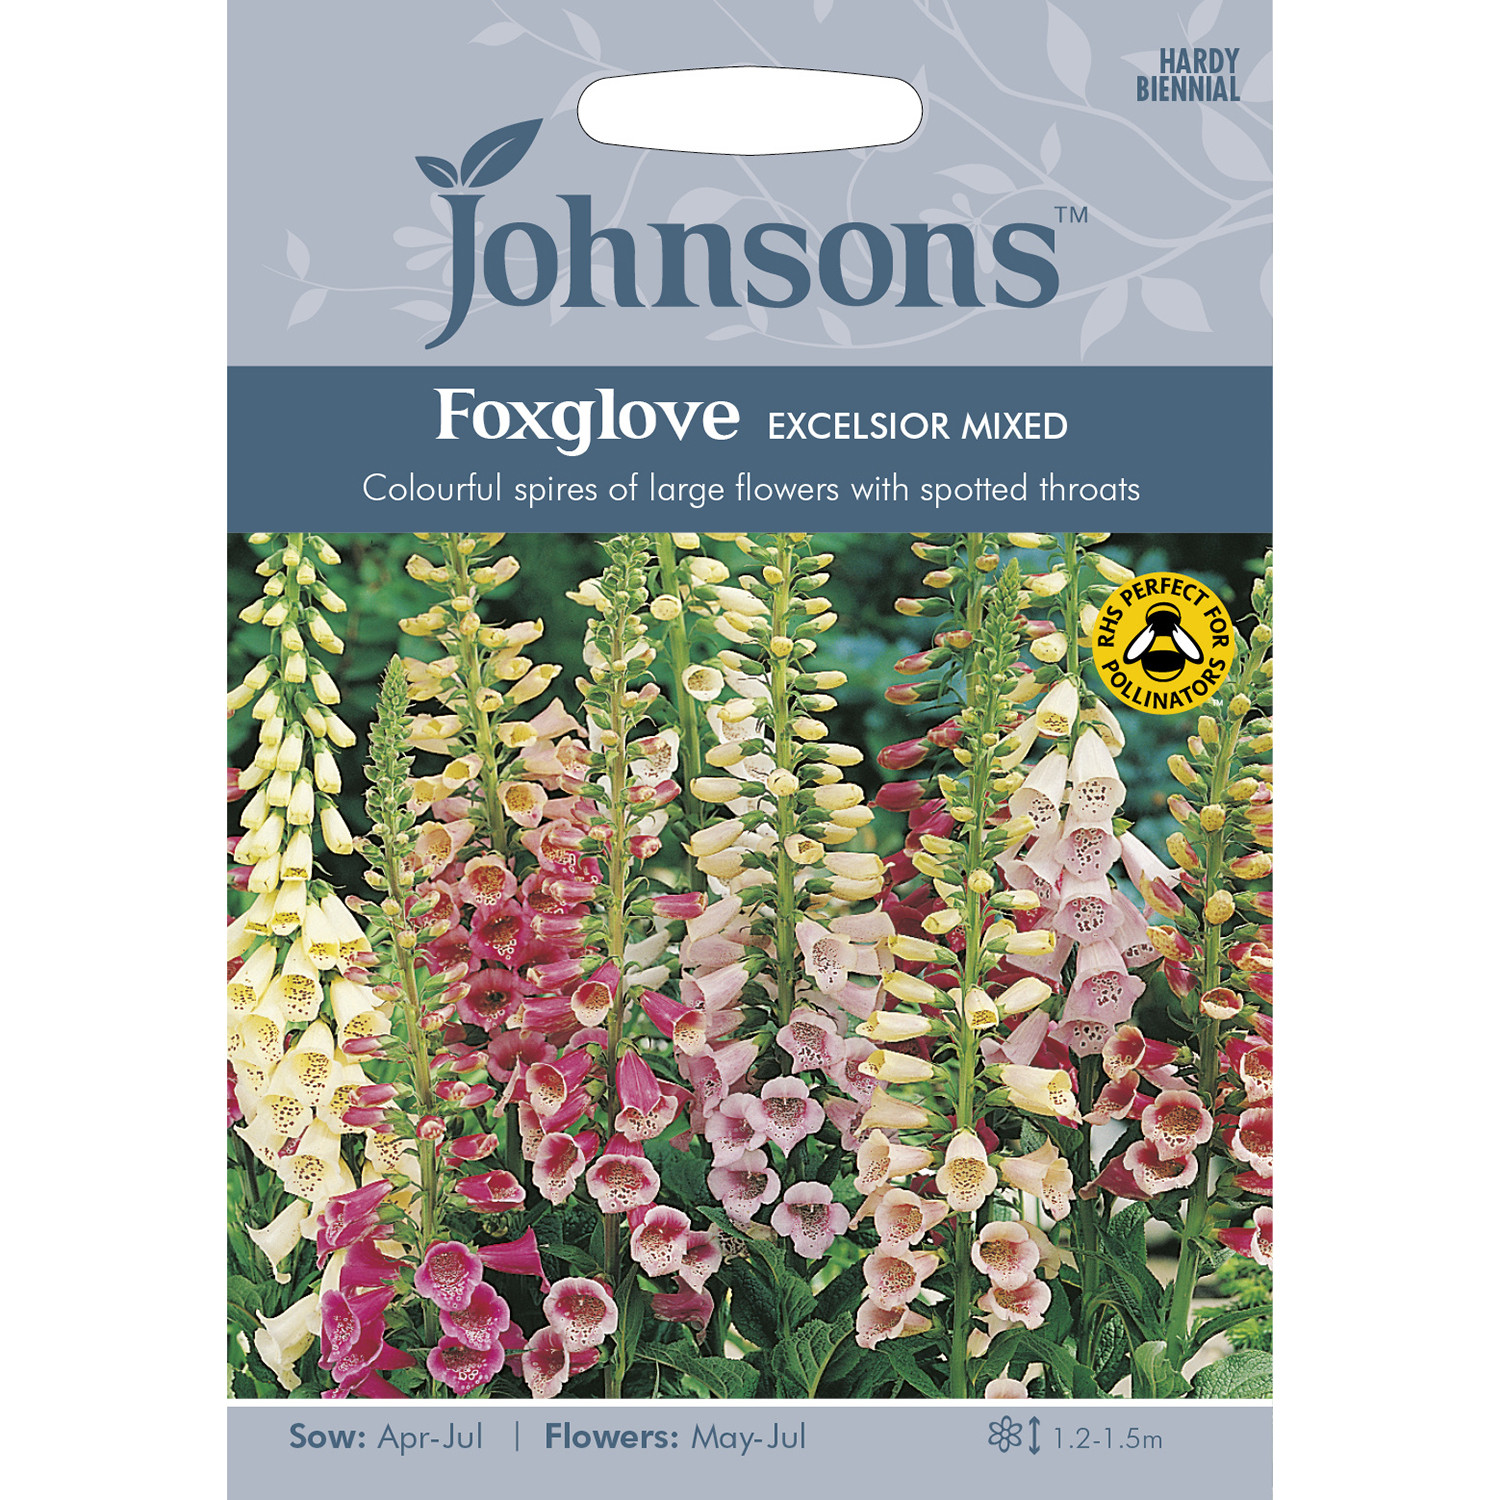 Johnsons Foxglove Excelsior Mixed Flower Seeds Image 2